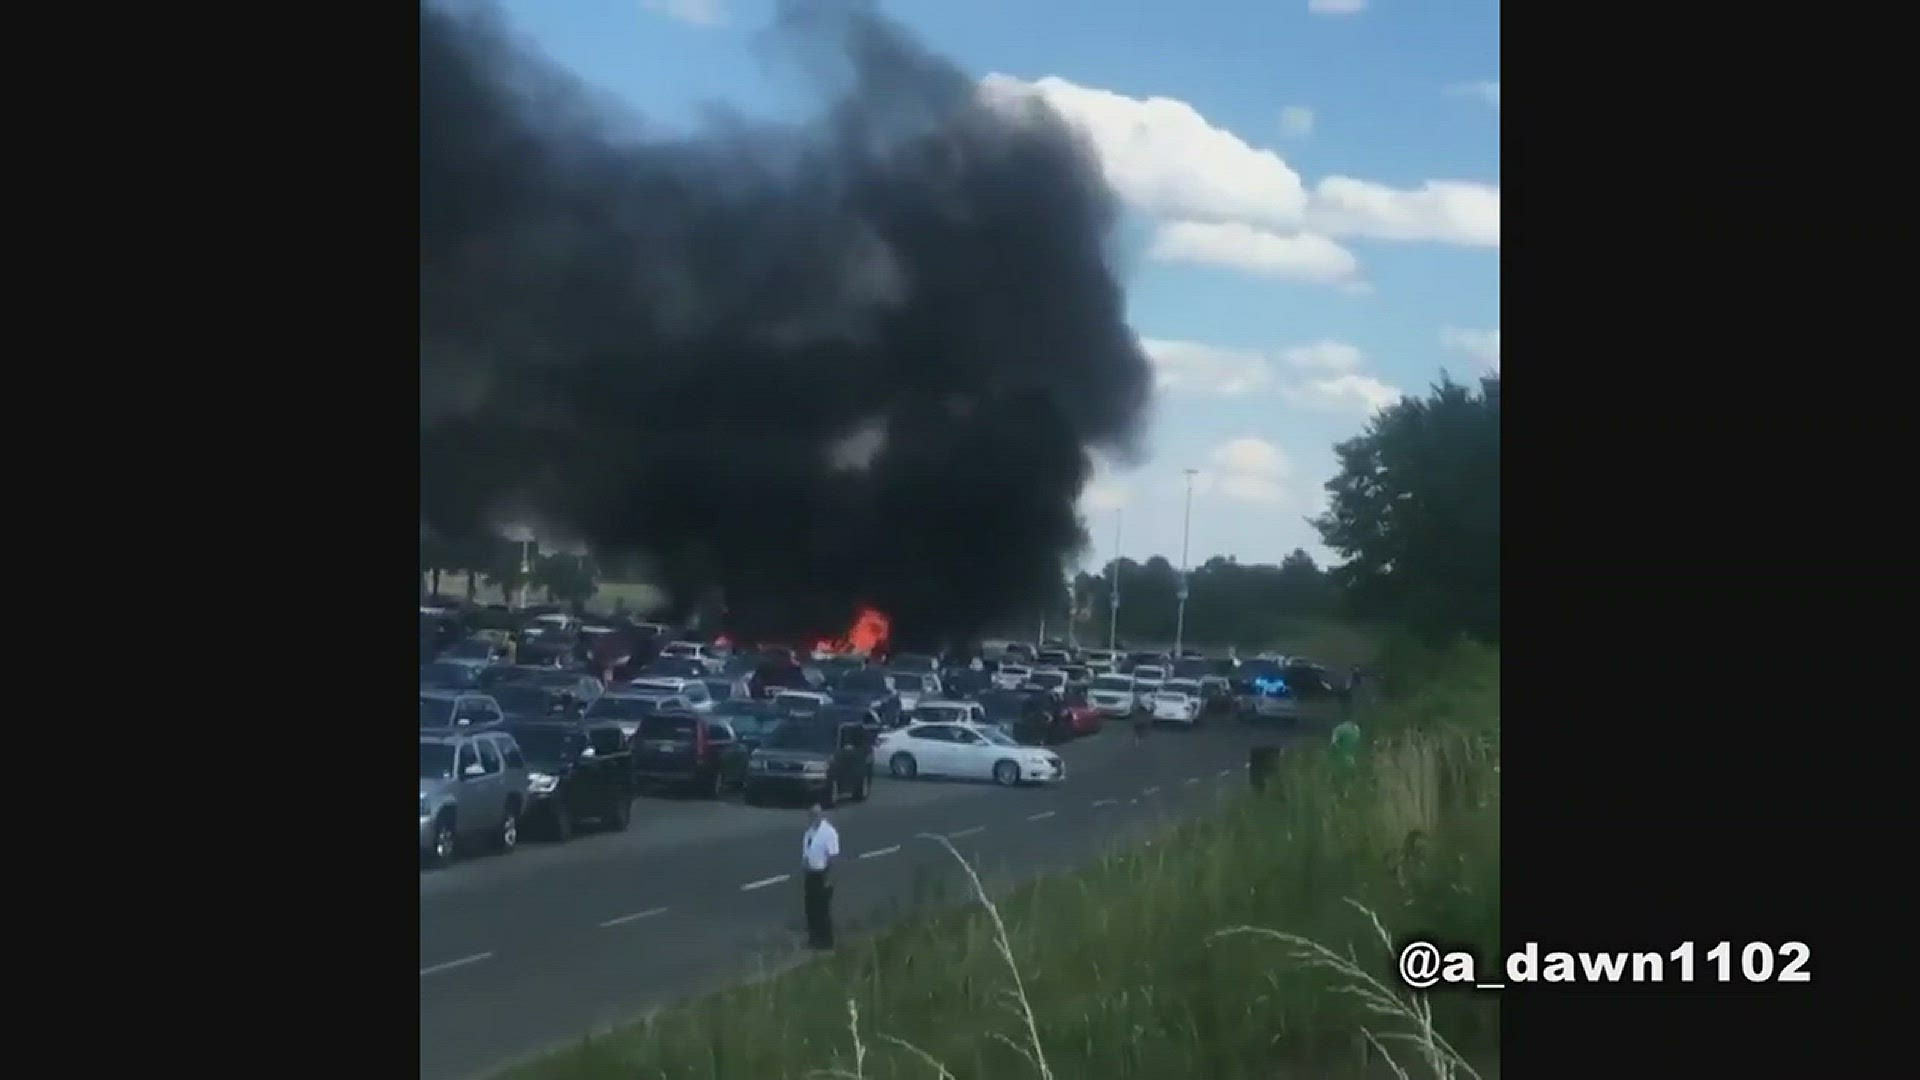 A viewer shared a video of the fire in the Carowinds parking lot.